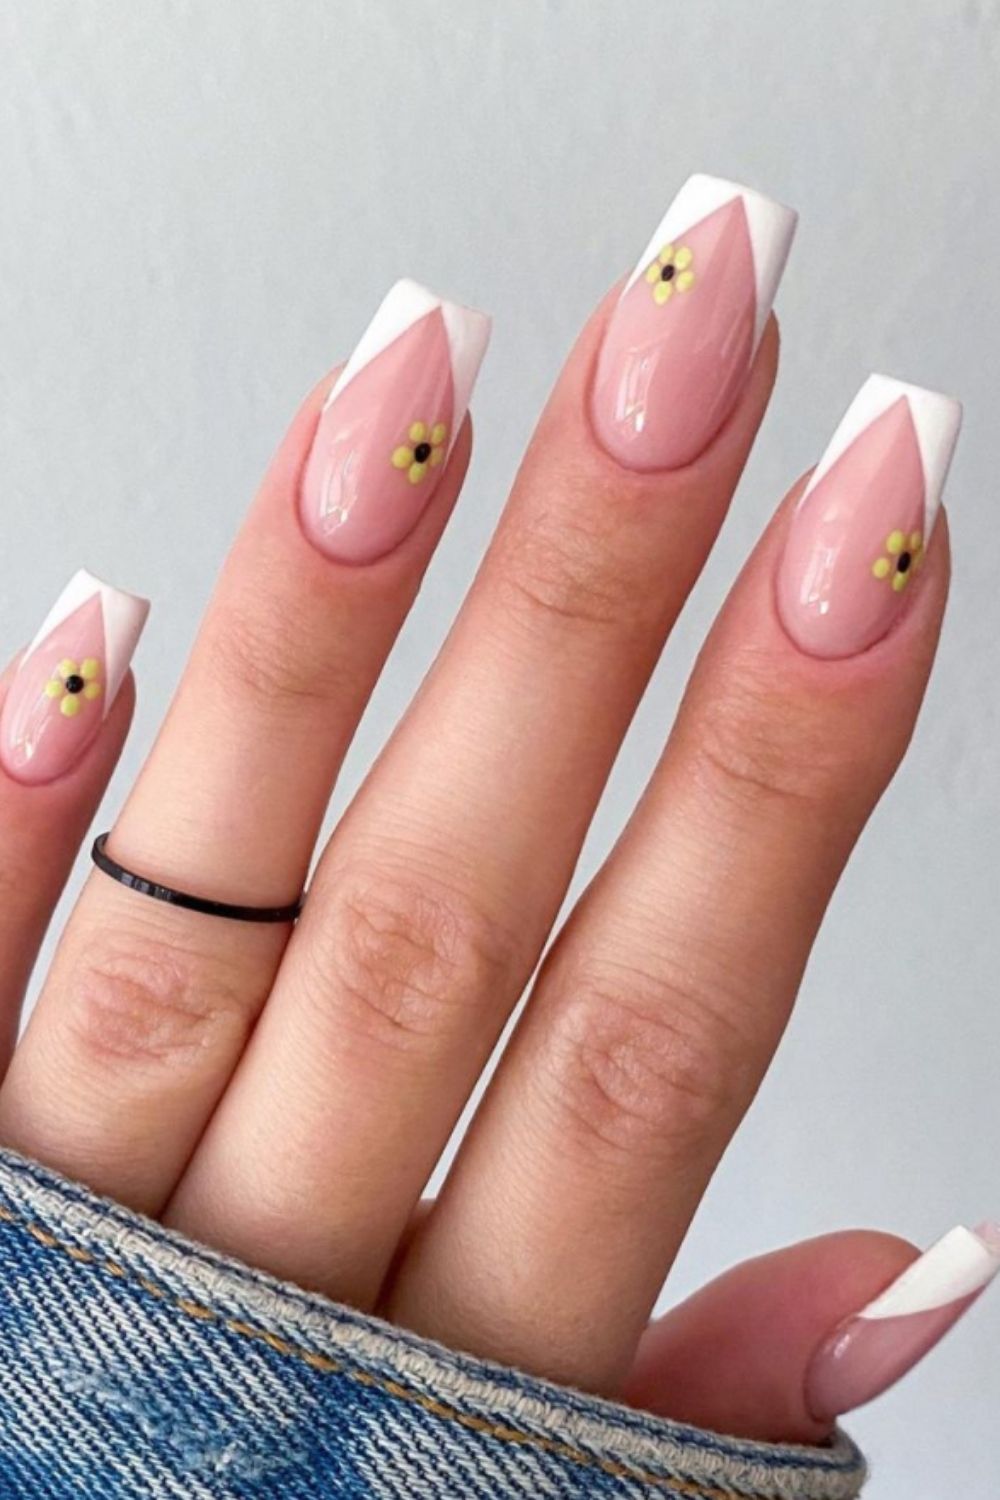 White tip coffin shaped nail art designs with flowers